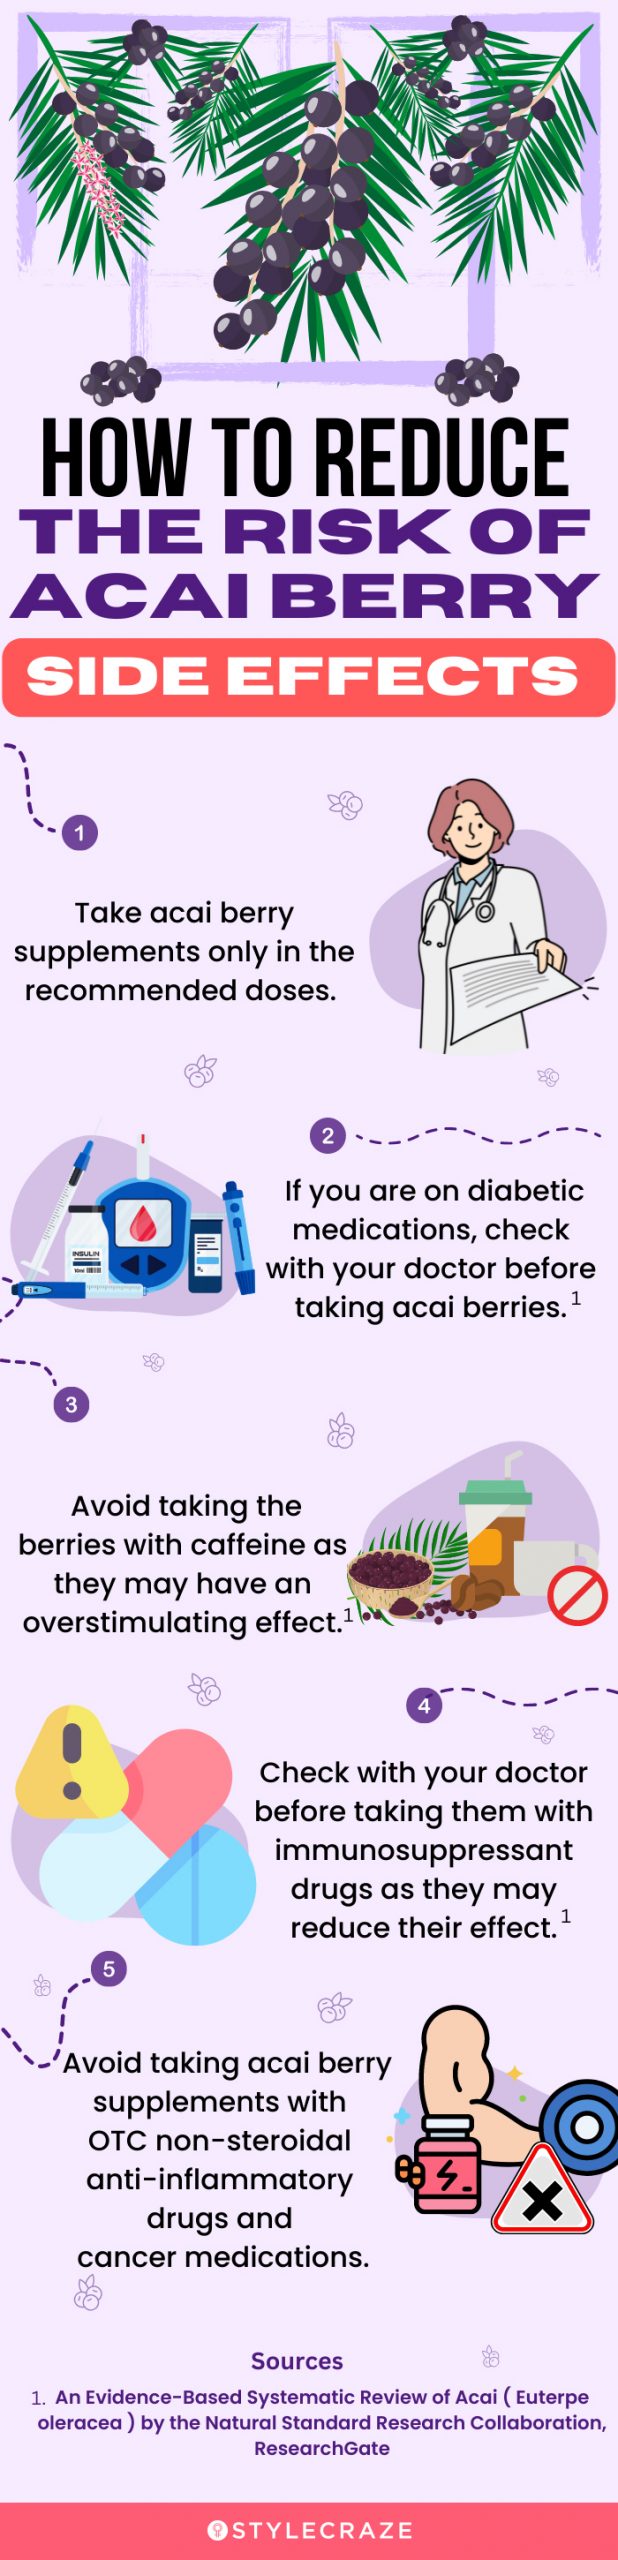 how to reduce the risk of acai berry side effects [infographic]